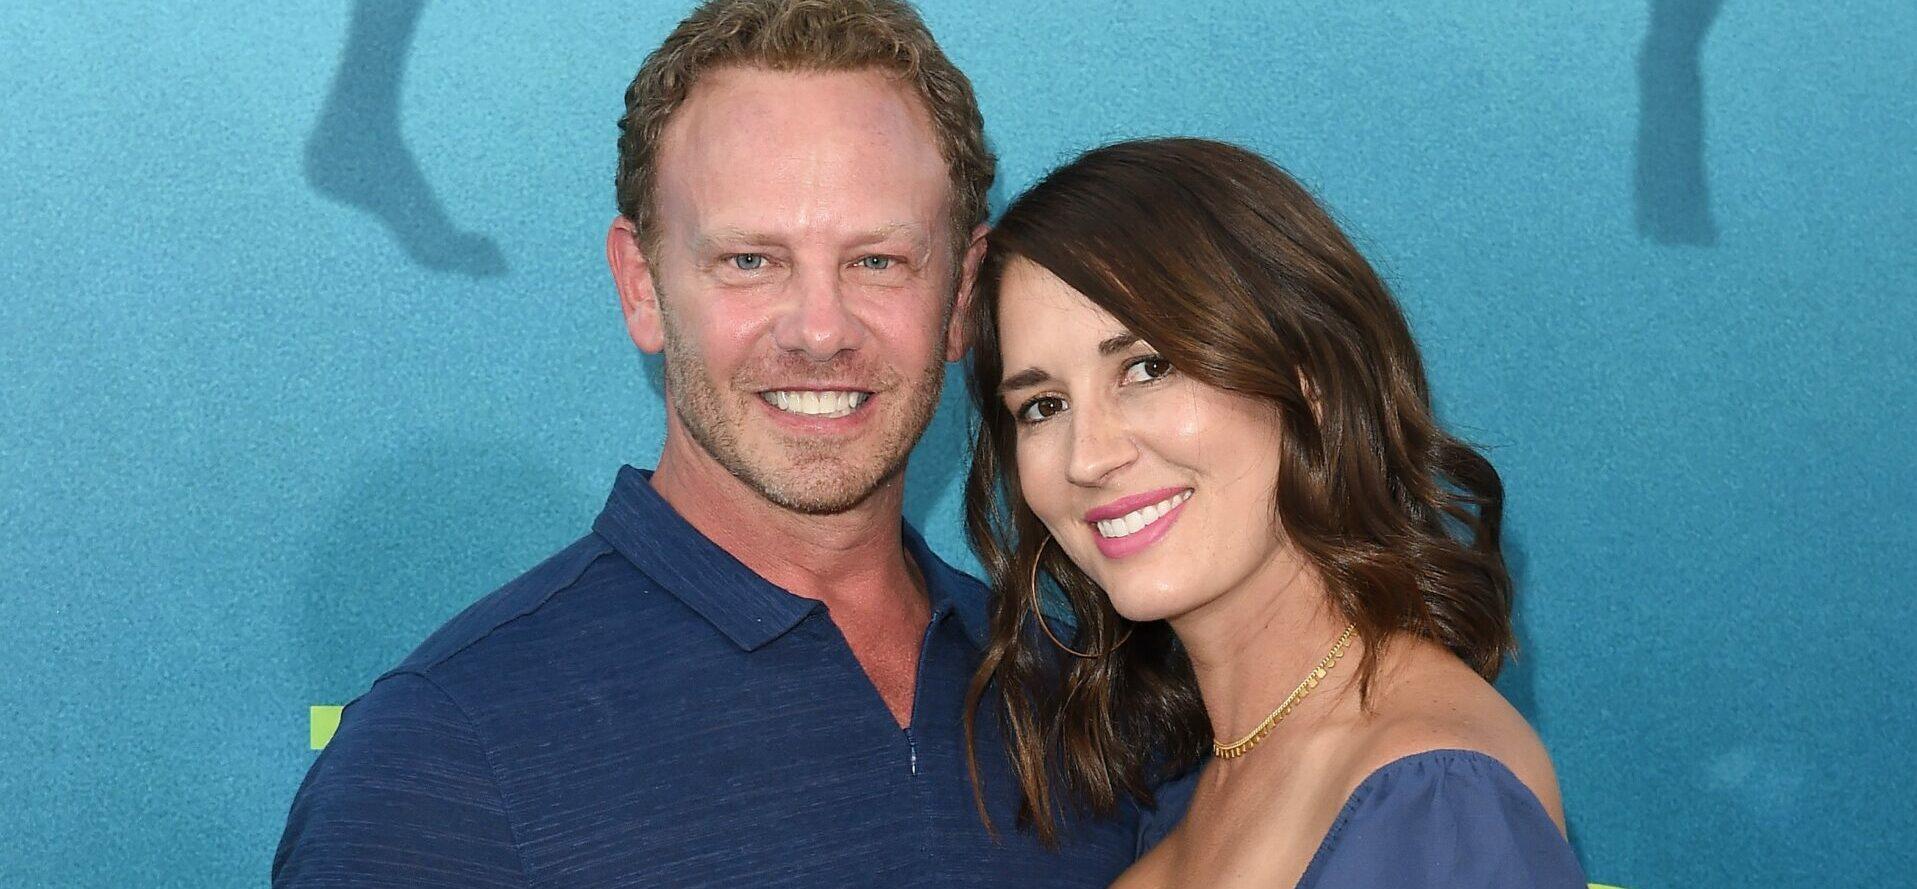 ‘90210’ Star Ian Ziering Finally Settles Divorce With Ex-Wife After 3 Years